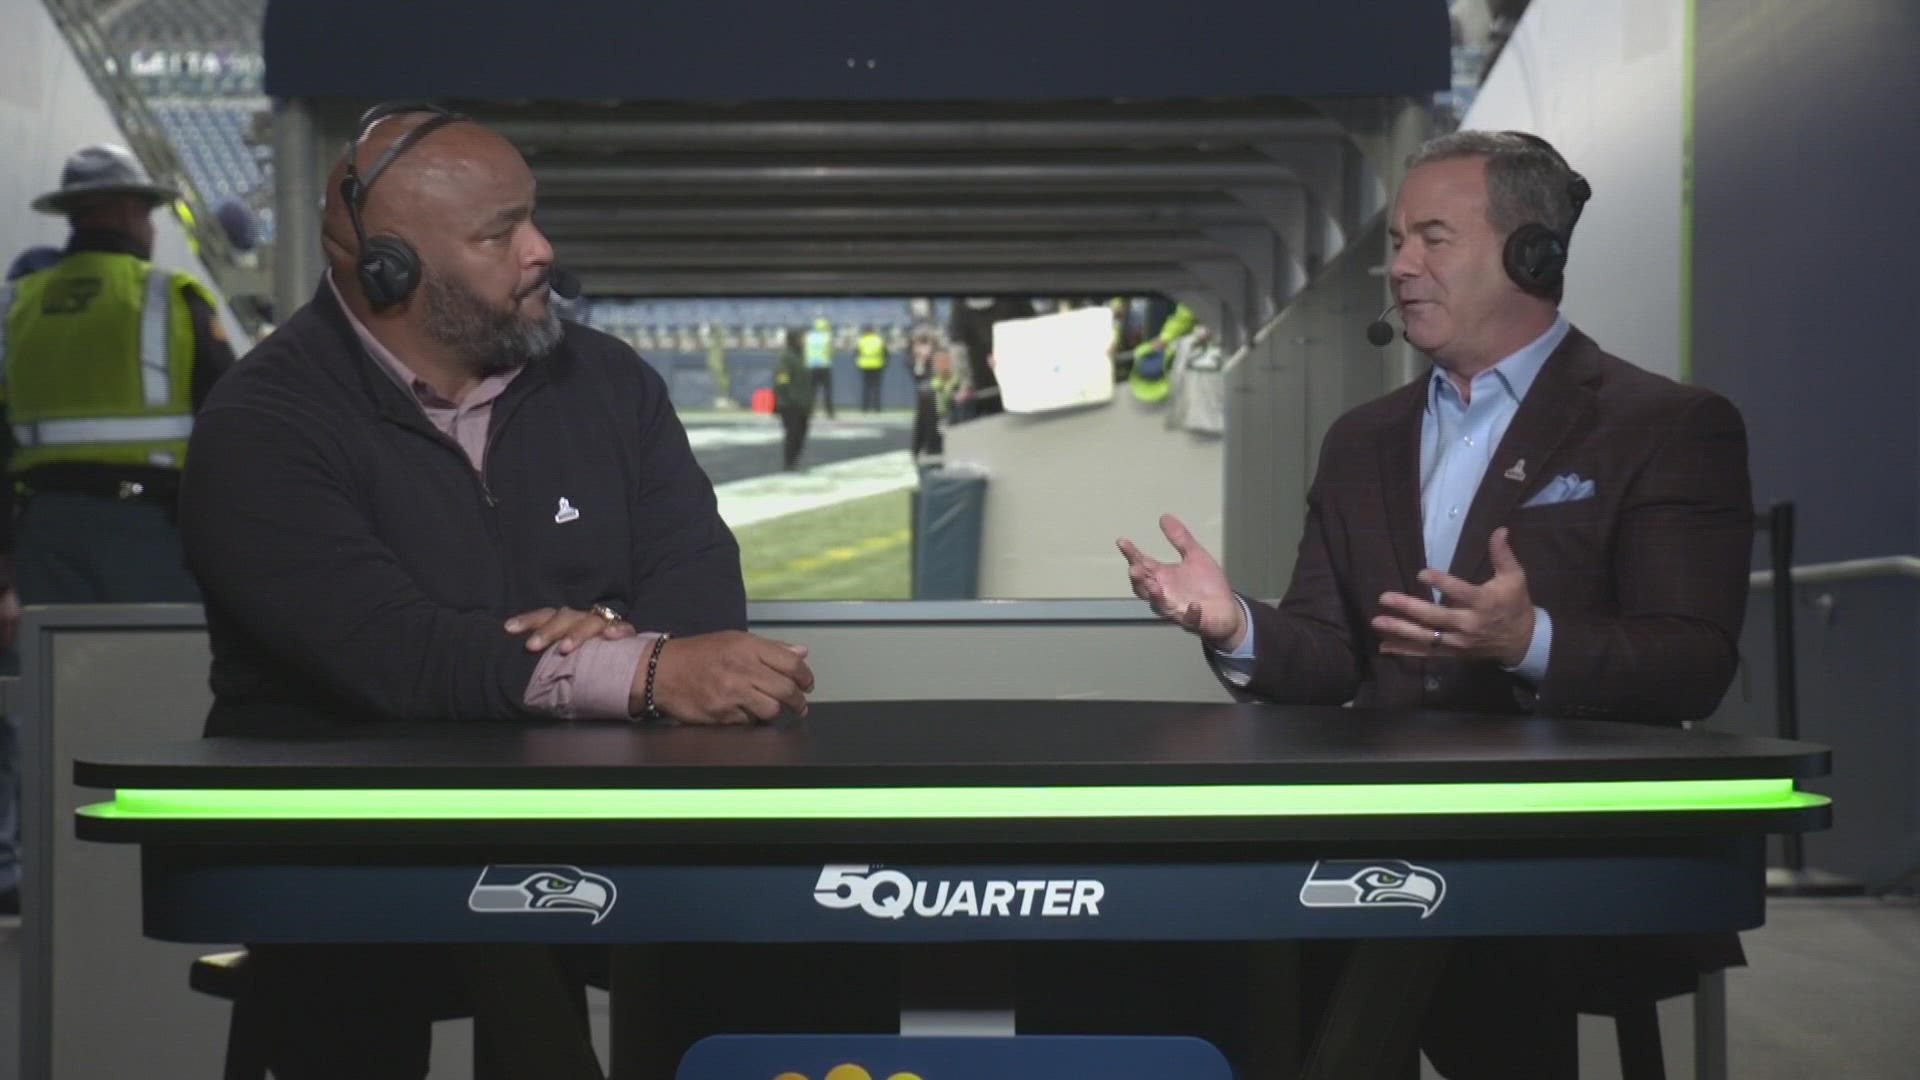 KING 5 Seahawks analyst Walter Jones breaks down how Seattle managed to slow down one of the NFL's top running backs in the victory over the Giants on Sunday.